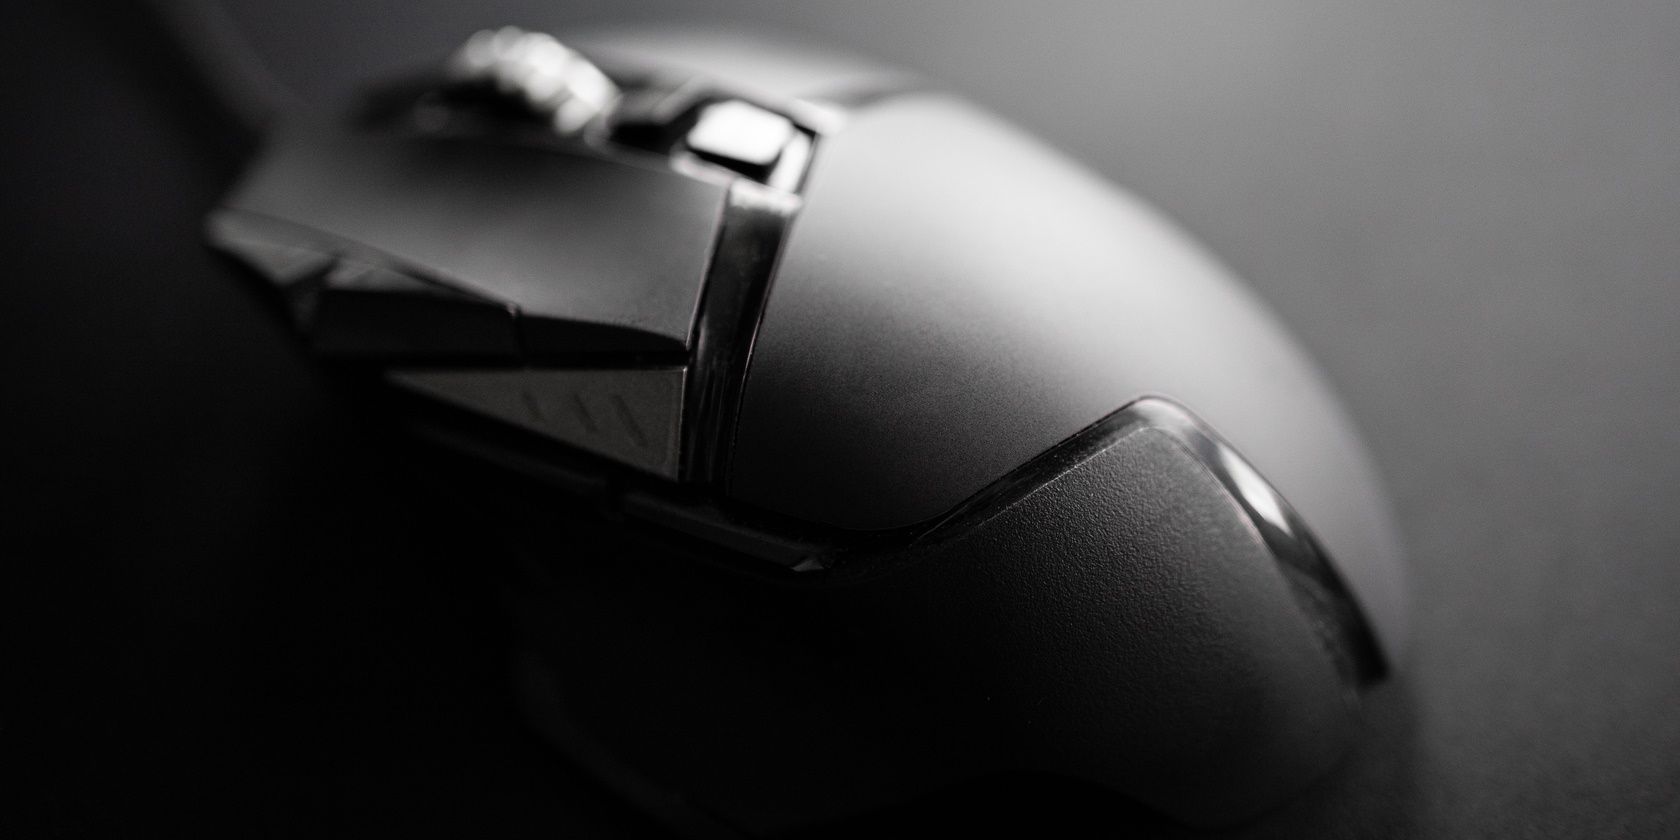 Black and white close-up of a gaming PC mouse